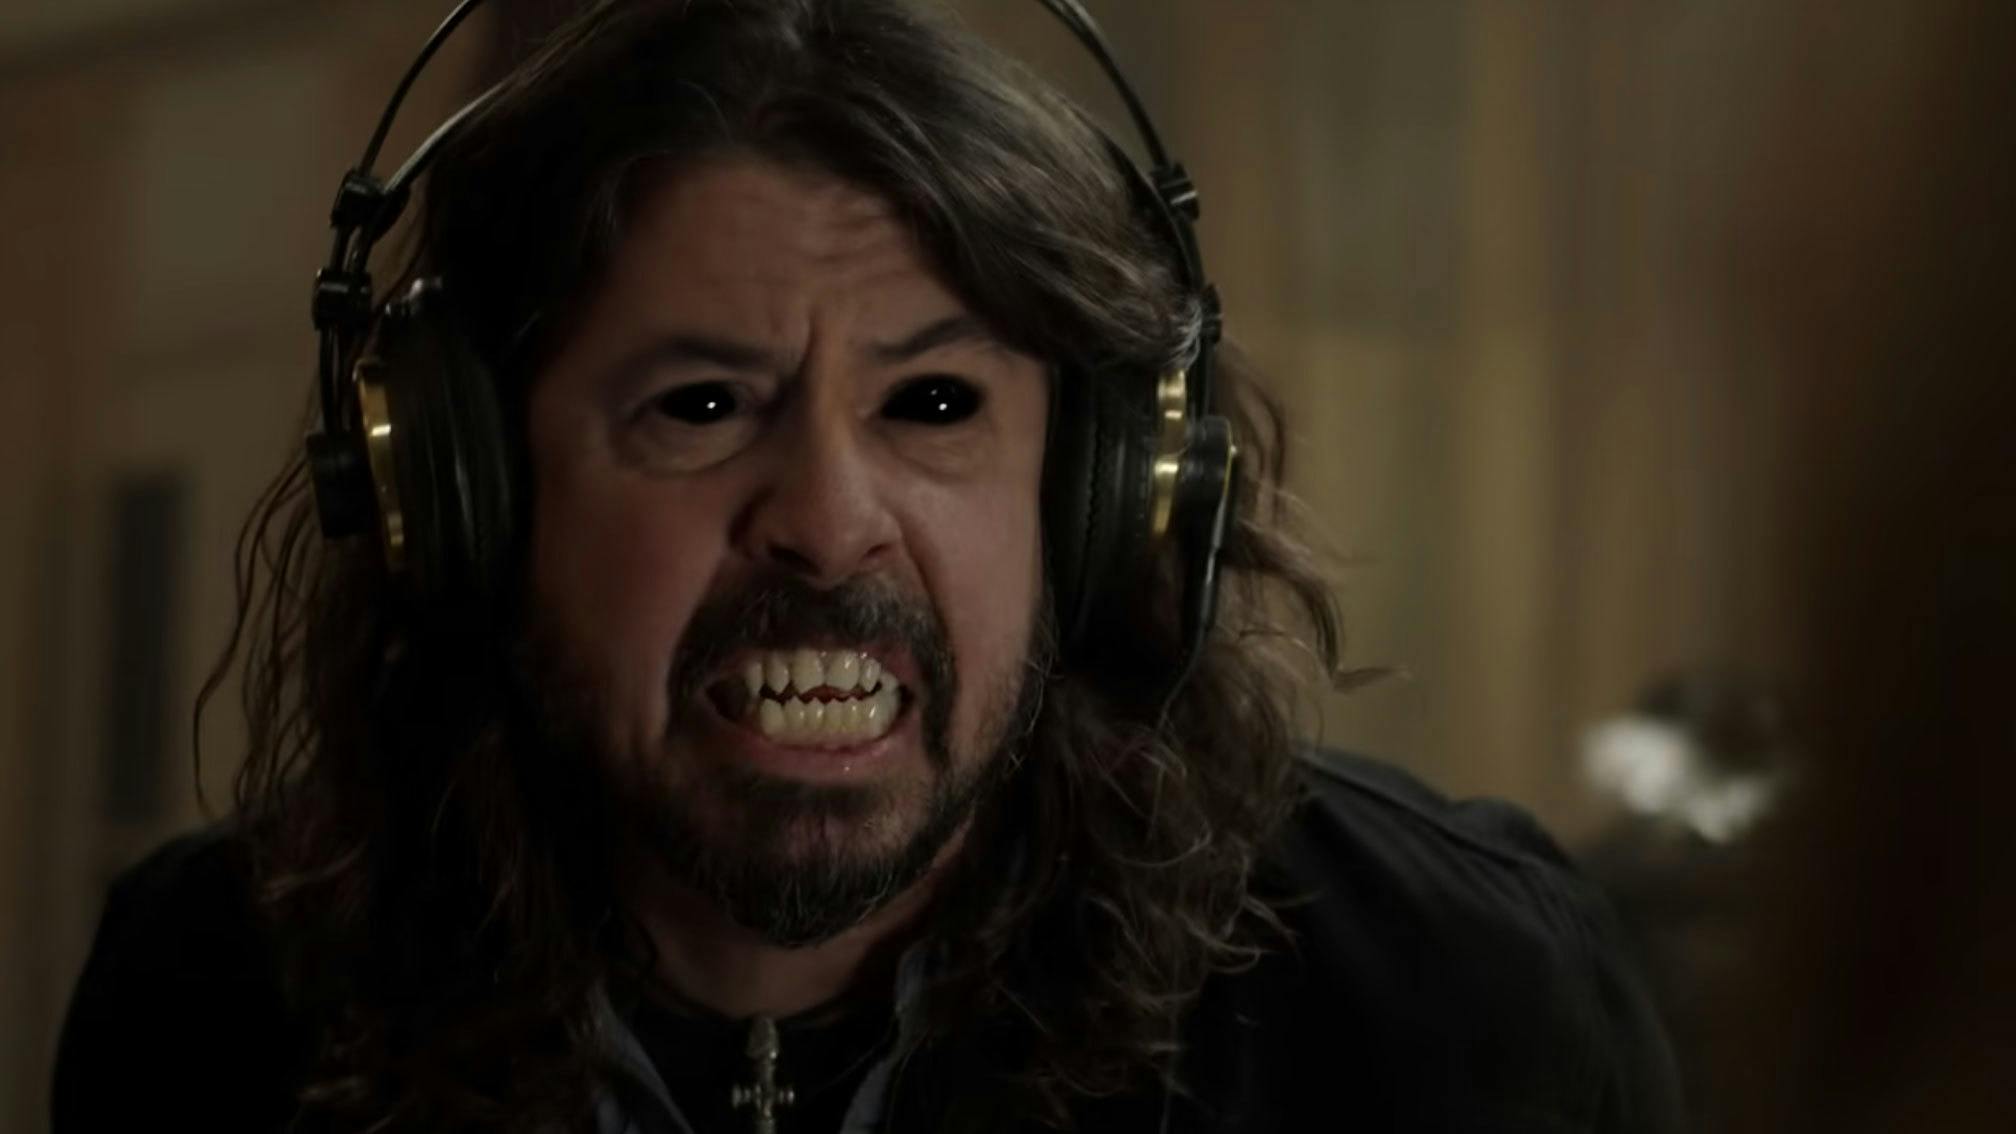 Watch: Dave Grohl causes chaos in new trailer for Foo Fighters’ horror-comedy, Studio 666